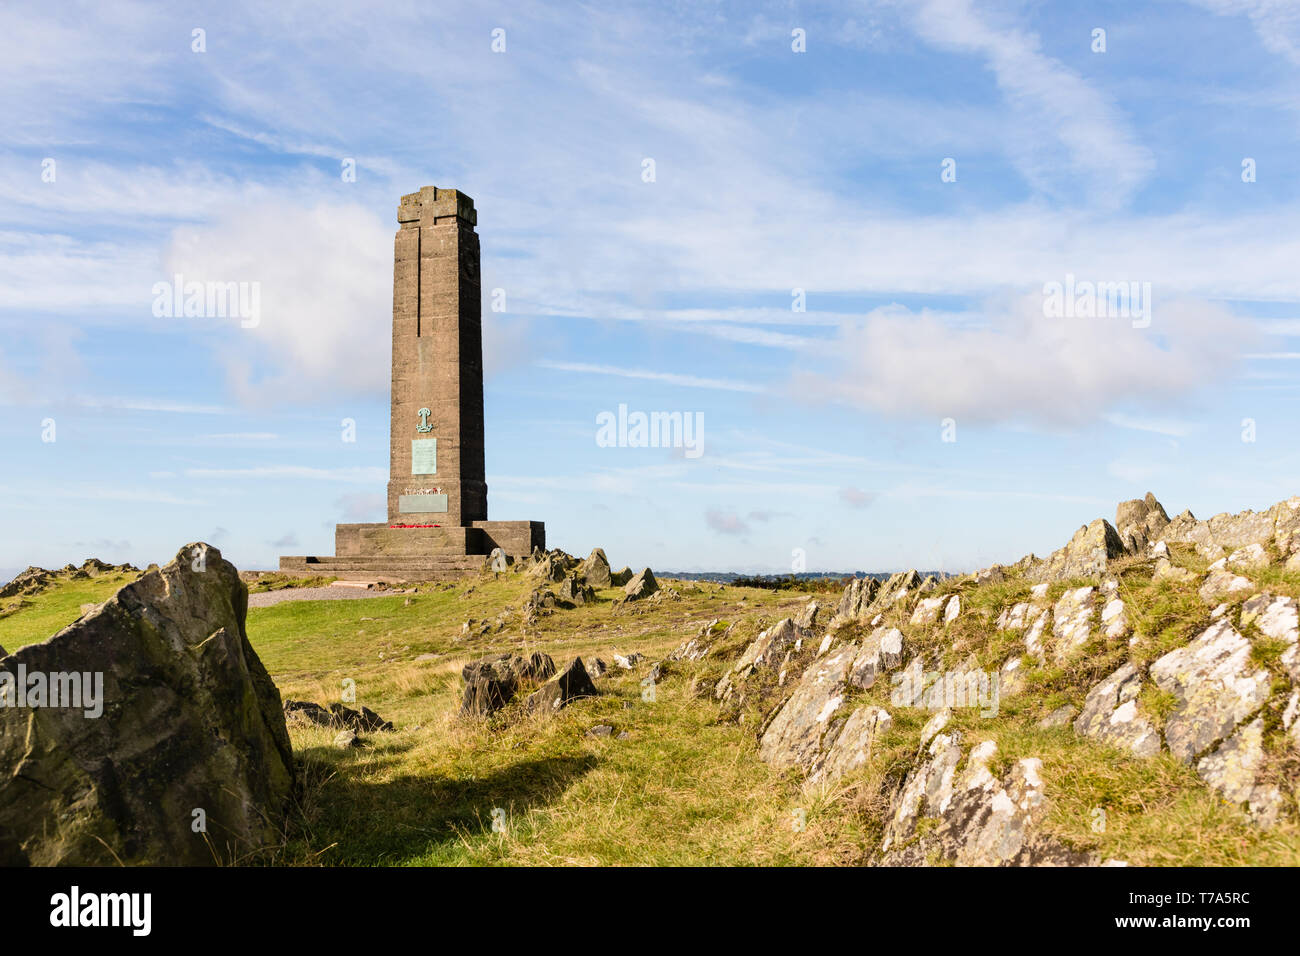 Bradgate, Leicestershire / UK - September 19th 2017: A concrete obelisk - the Leicestershire Yeomanry War Memorial standing on a hilltop amidst rocks. Stock Photo